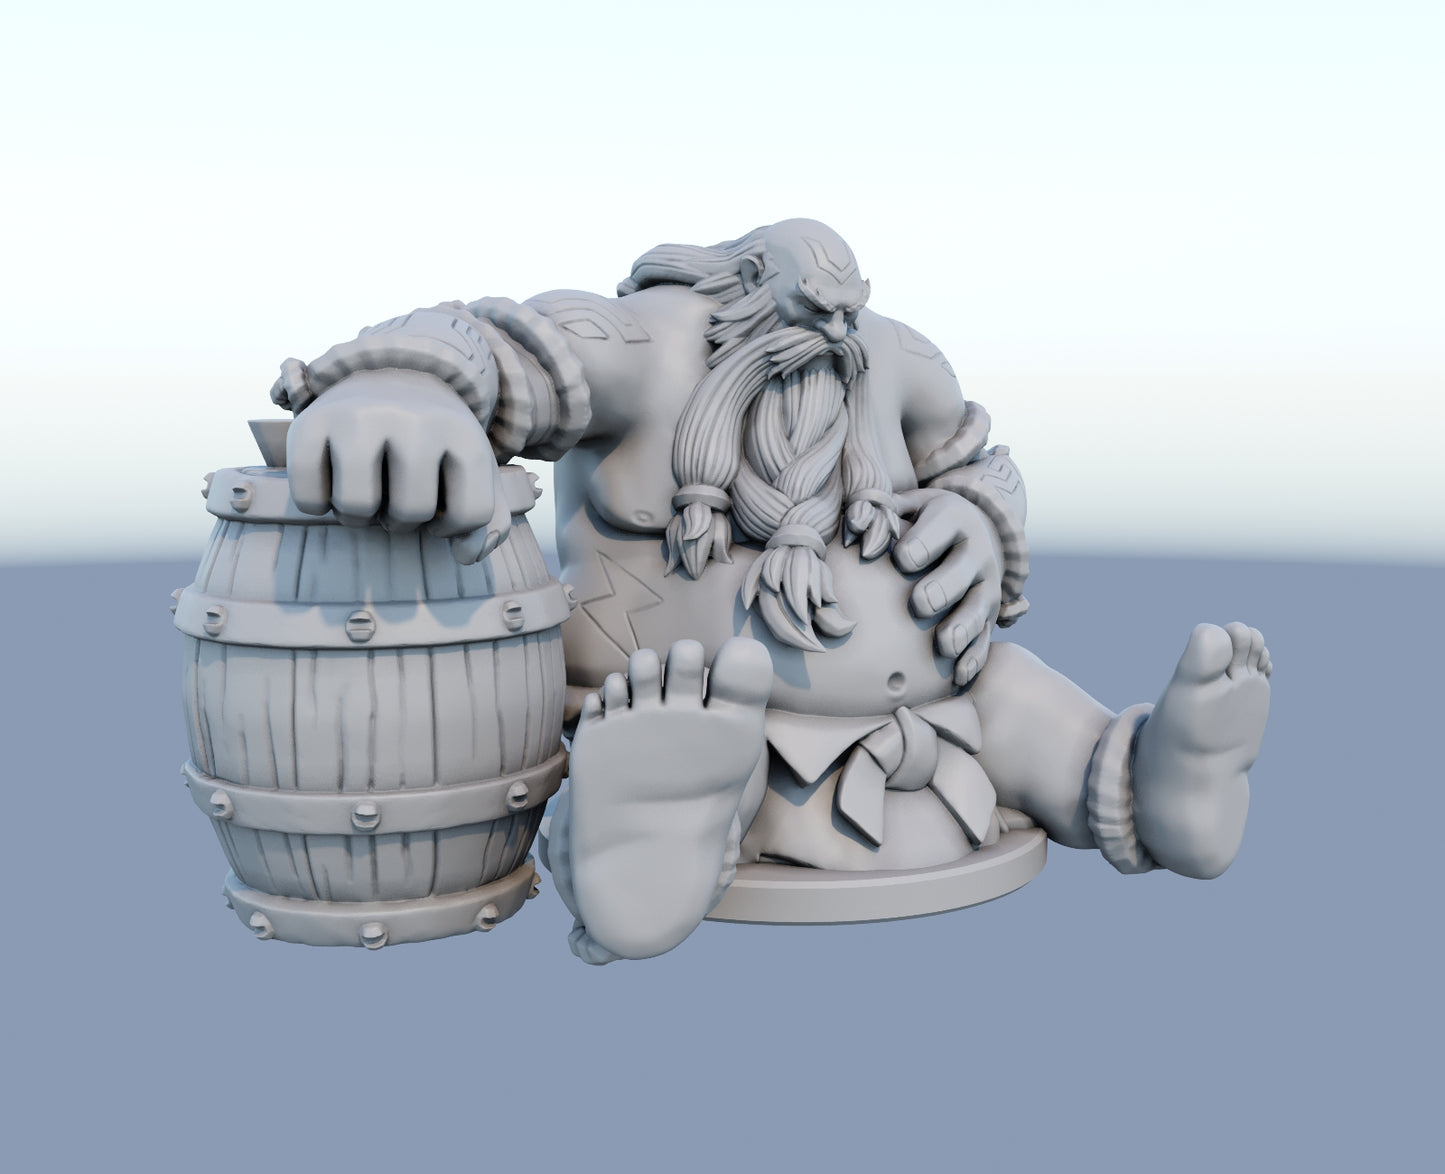 Gragas 3D-printed League of Legends champion figure. Decorate your gaming setup or home with your favorite League of Legends champion! Choose between the unpainted version, perfect for you to paint yourself, or the hand-painted version by a professional painter. Order your figure today!